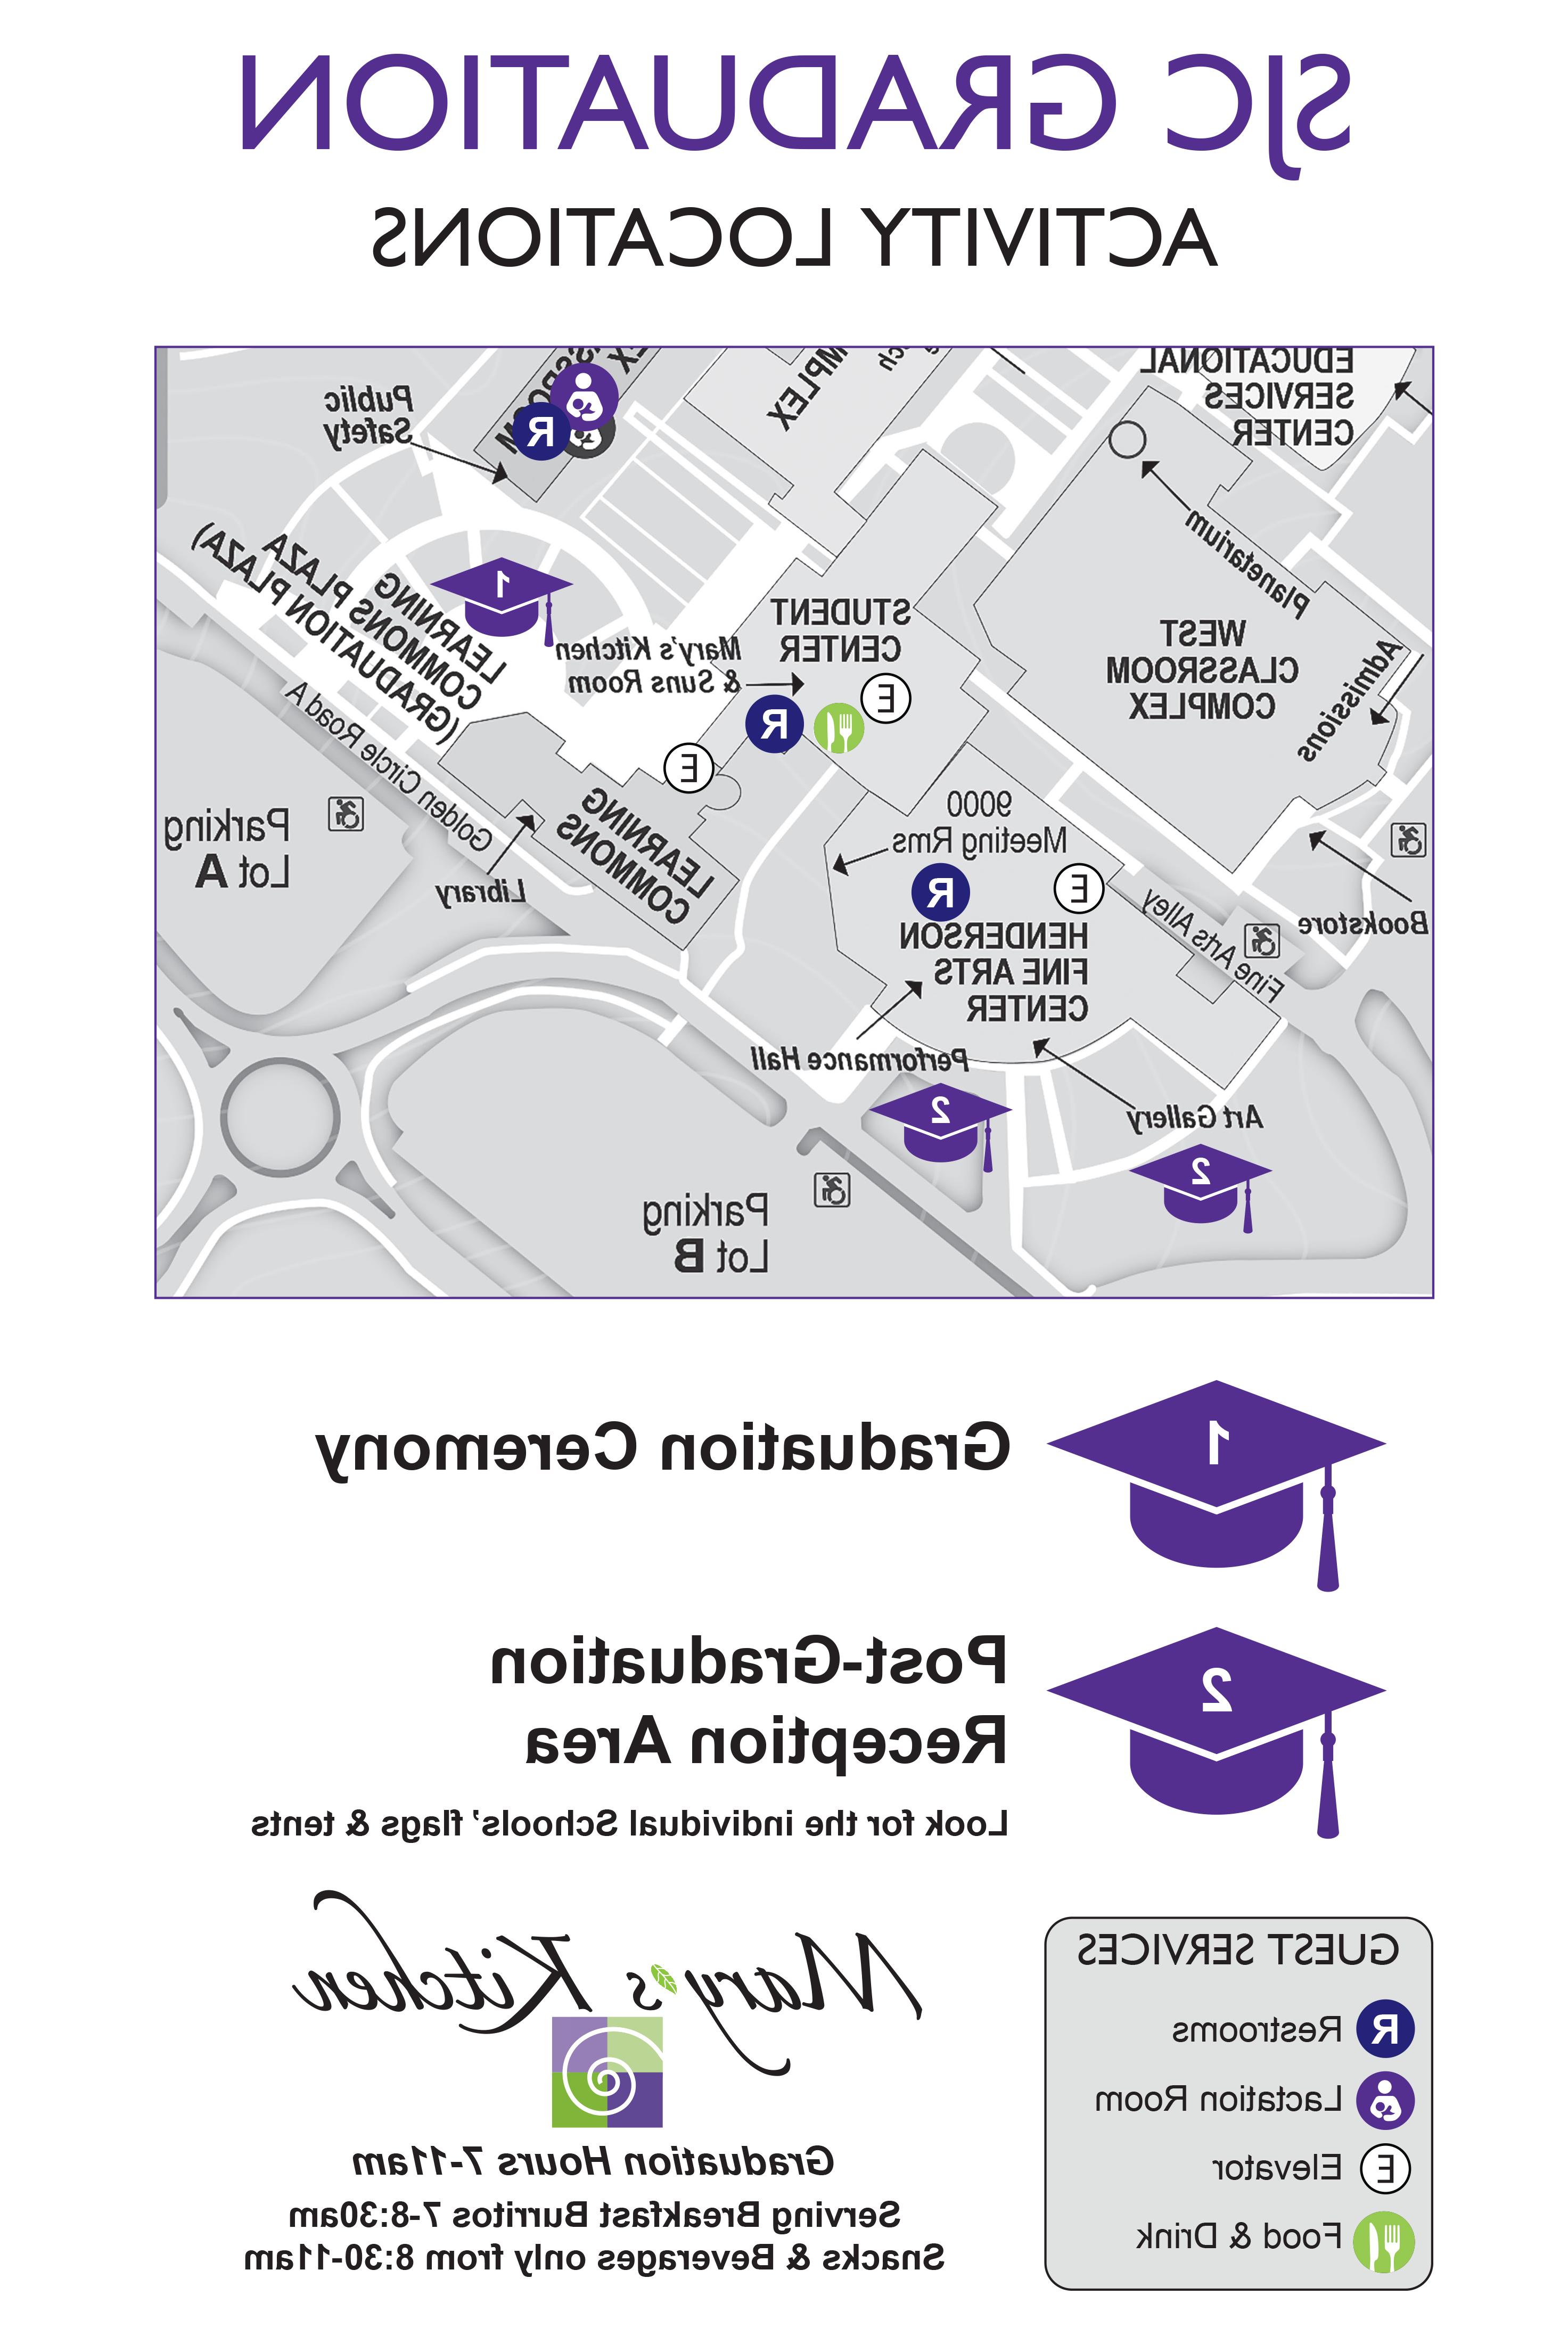 SJC Graduation Activity Locations, map of campus. 1 grad cap location for the graduation Ceremony. #2 Grad Cap Post-Graduation Reception Area look for the individual schools' flags & tents. Guest Services- Restrooms, Lactation Room, Elevator, Food & Drink. Mary's Kitchen Graduation Hours 7-11am Serving Breakfast Burritos 7-8:30am Snacks & Beverages only from 8:30-11am